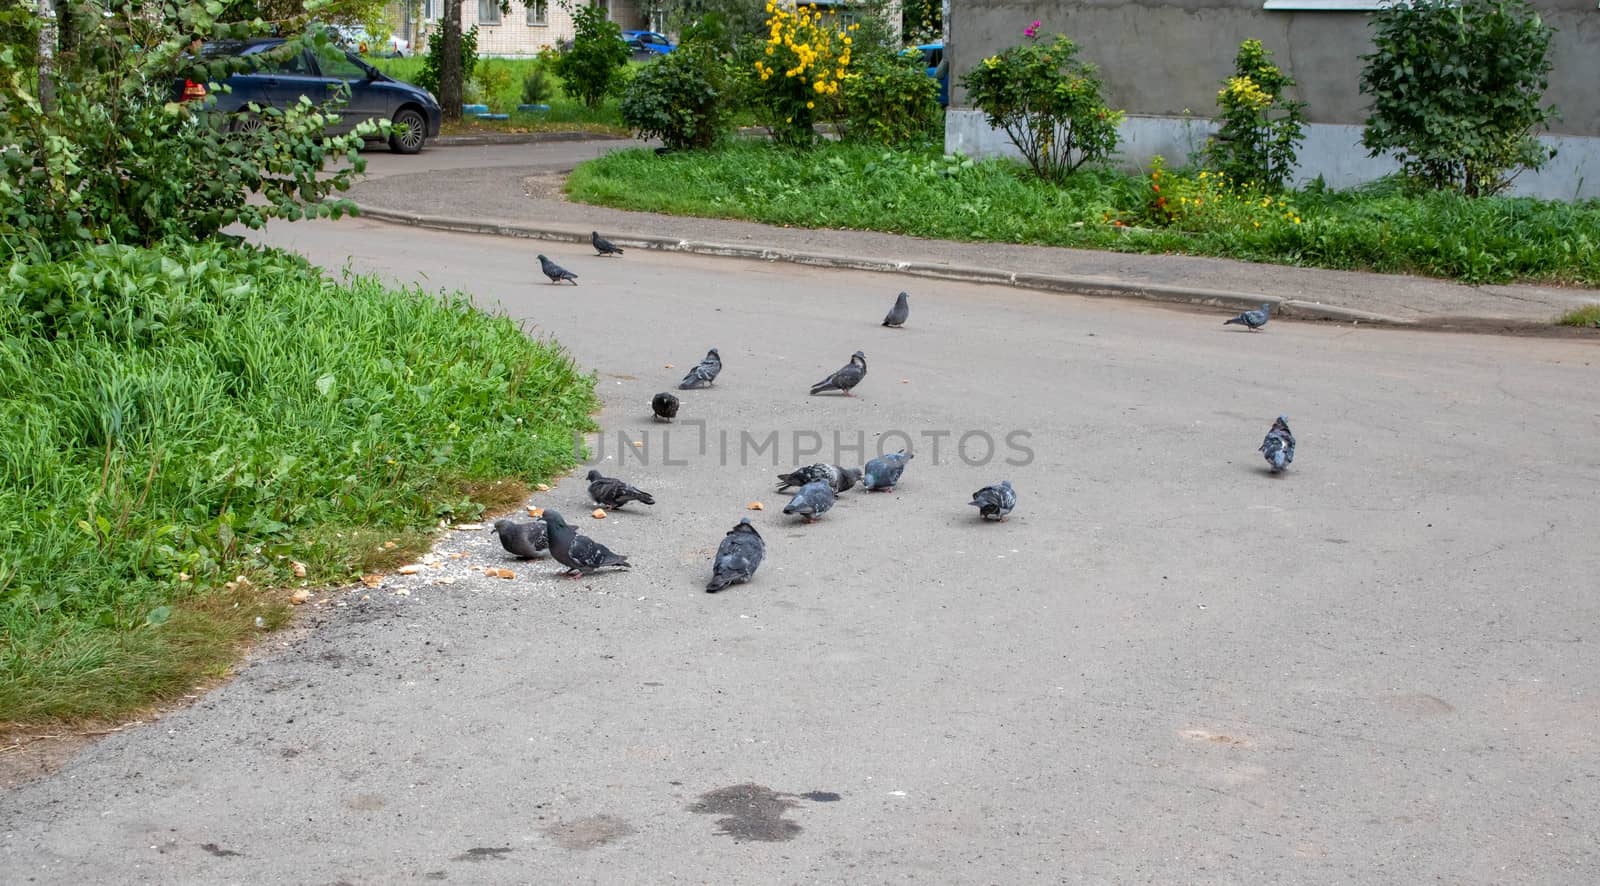 A flock of pigeons feed on bread in Sunny weather at a public feeding place. A large group of pigeons eating bread on the street.